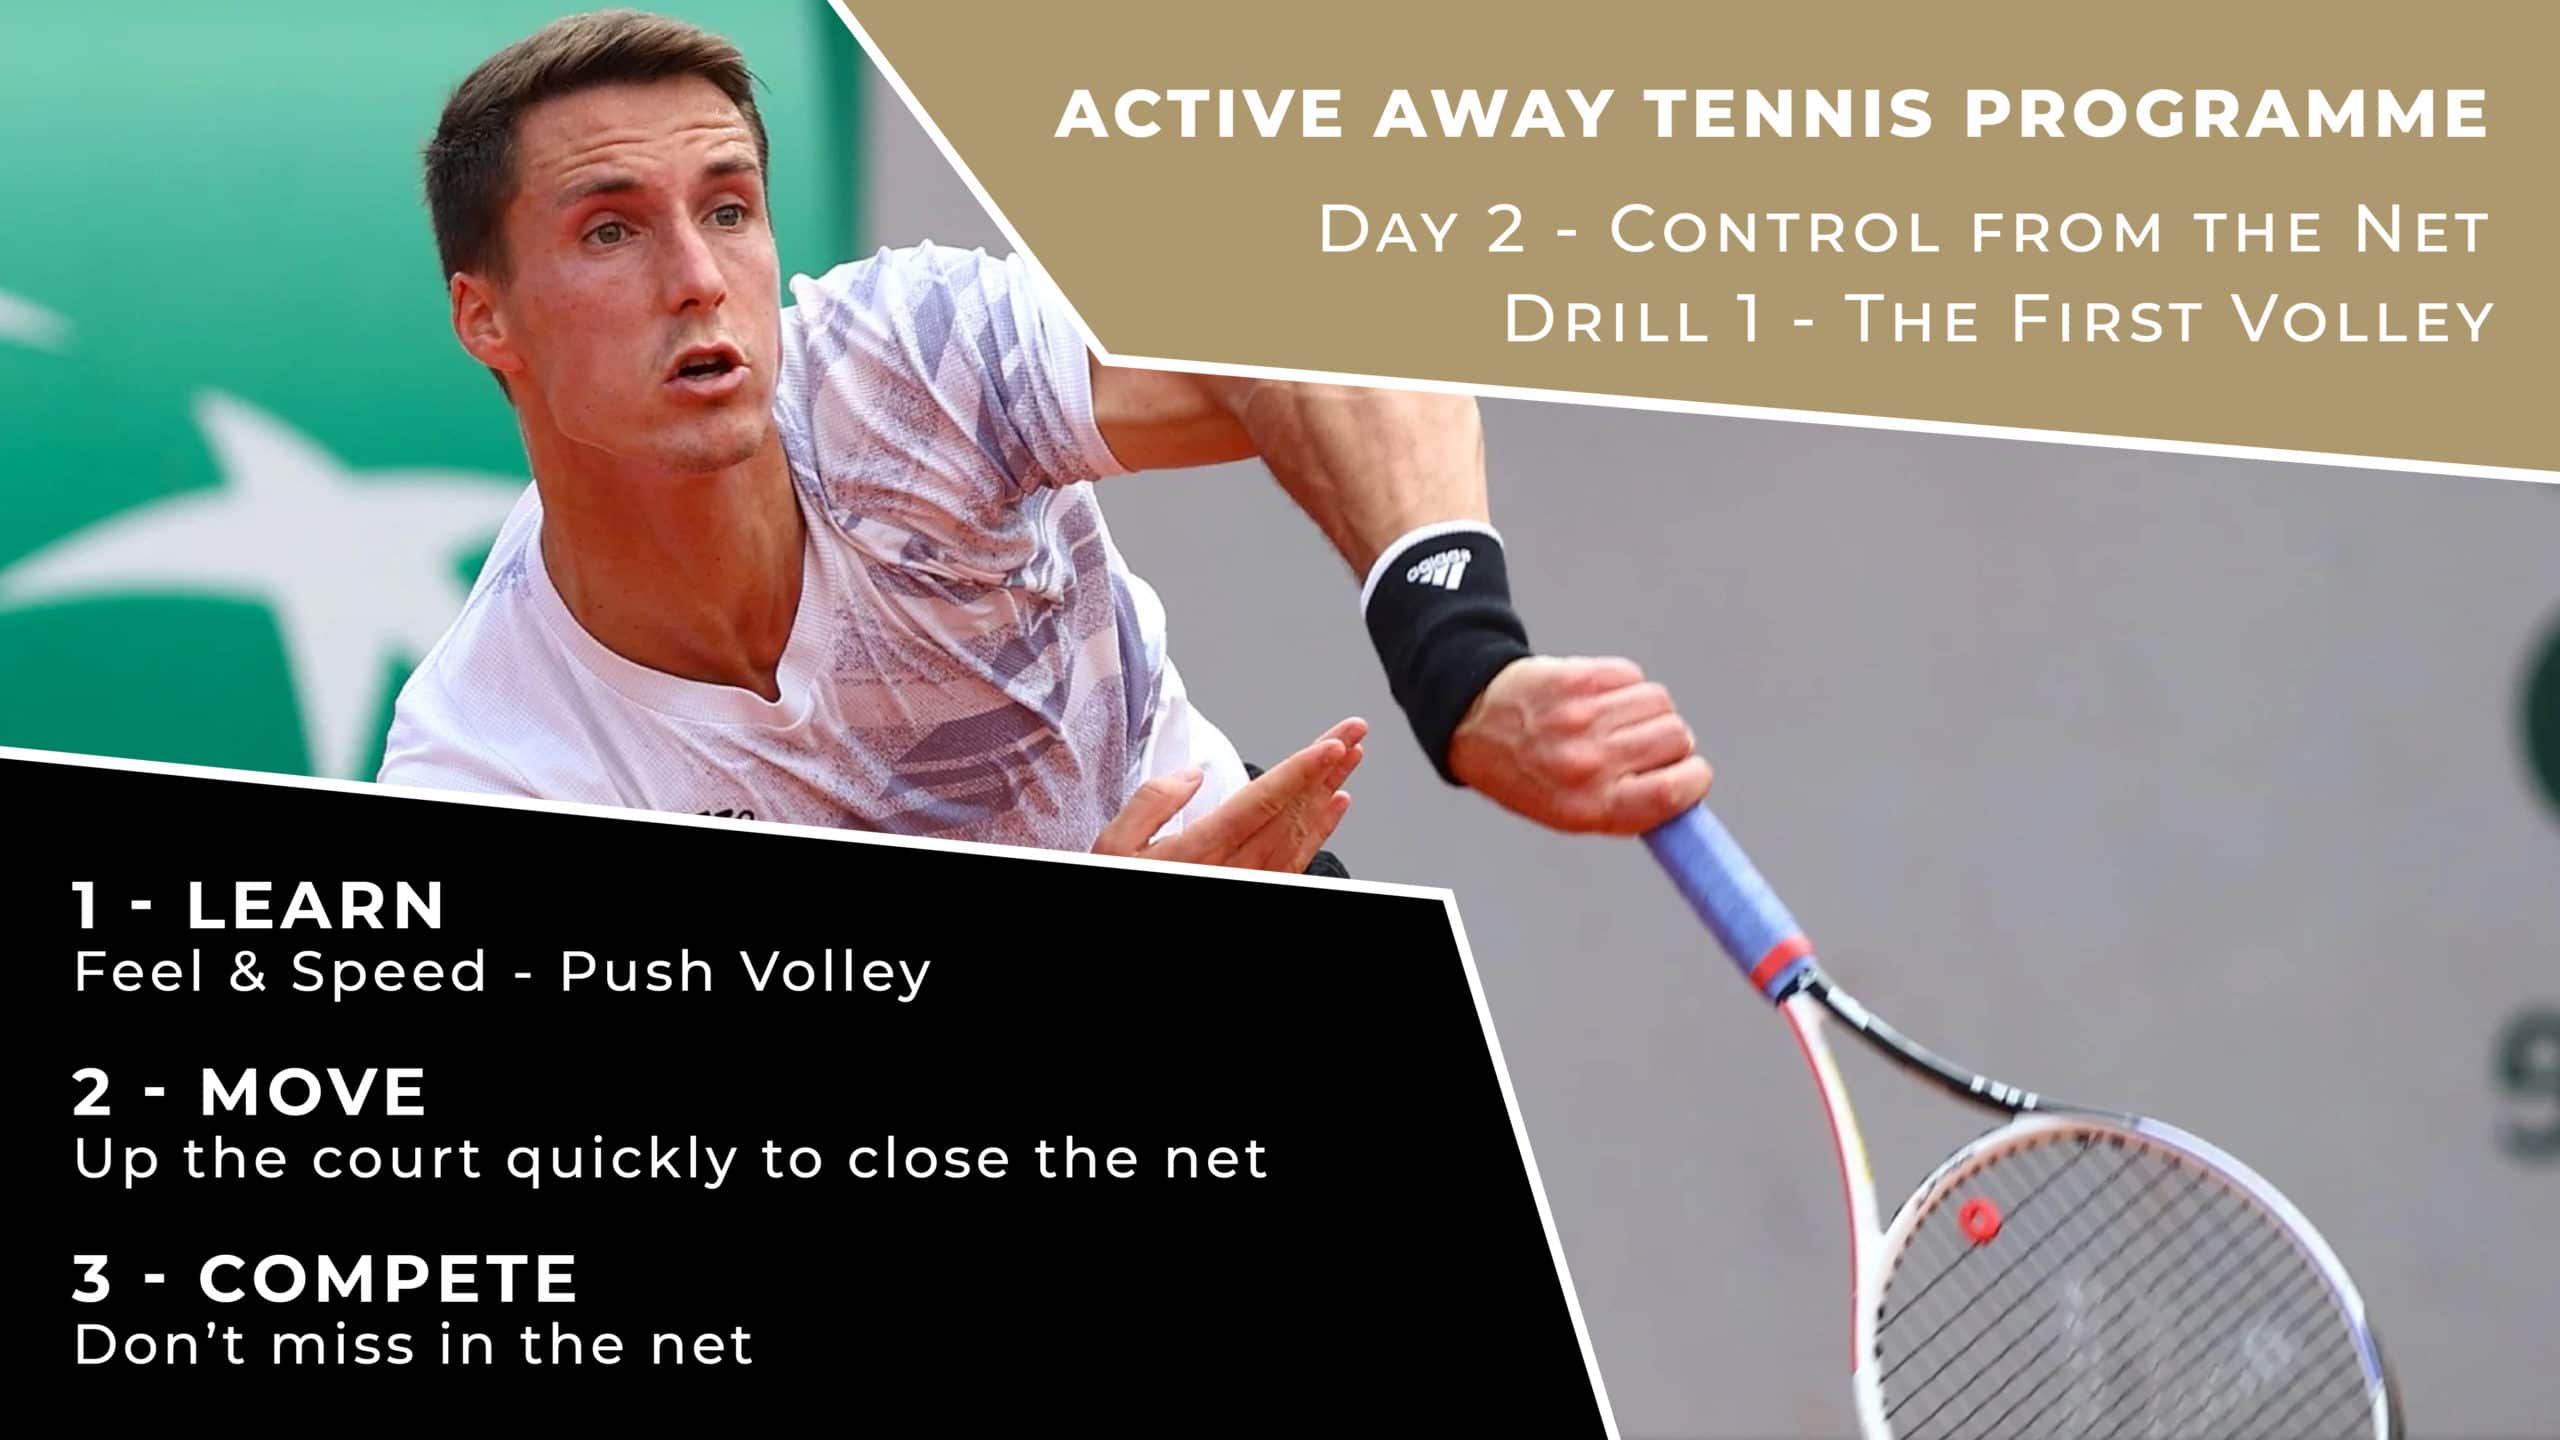 Day 2 - Control The Net Drill 1 - The First Volley | Active Away Tennis Programme